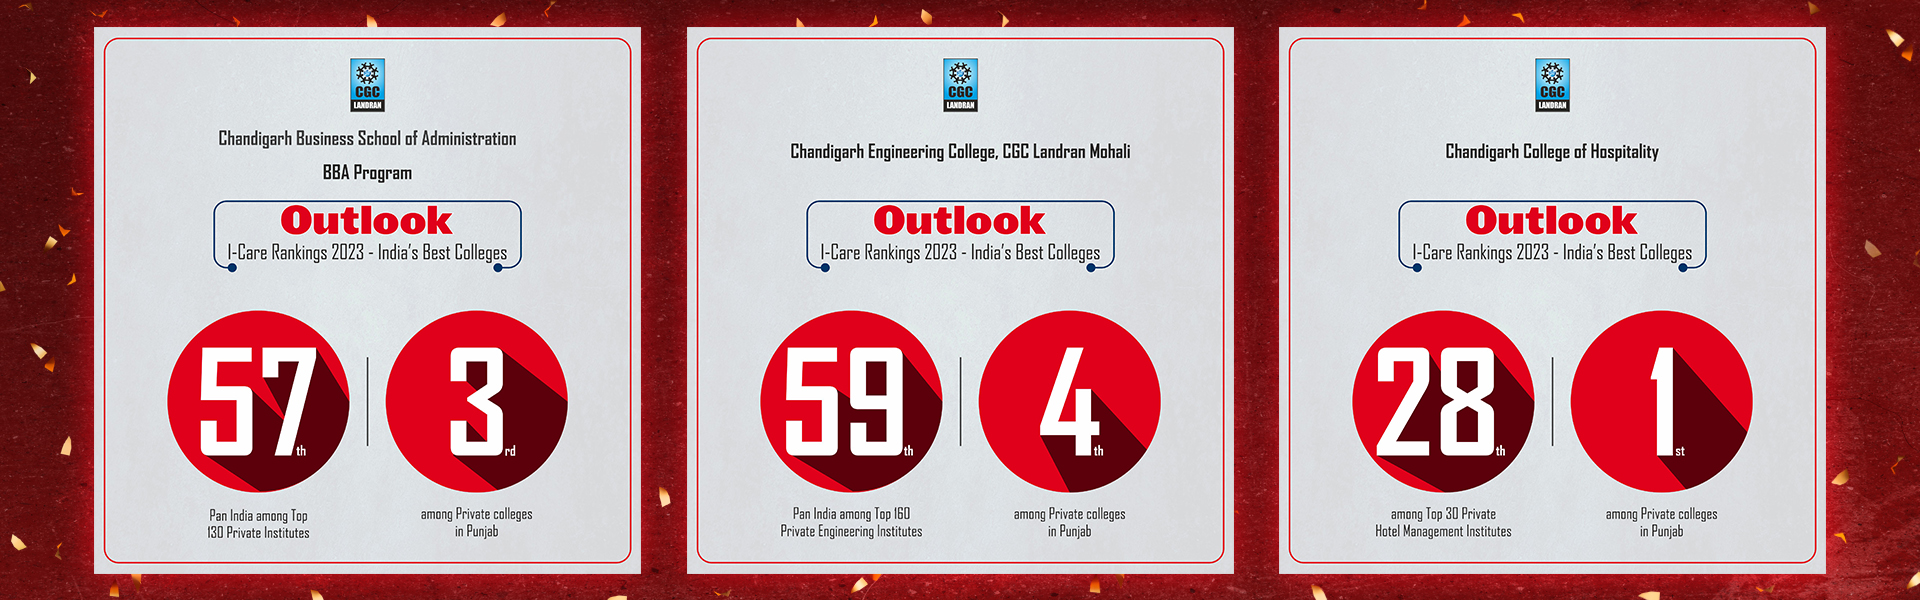 Outlook I-Care Rankings 2023- India’s Best Colleges 